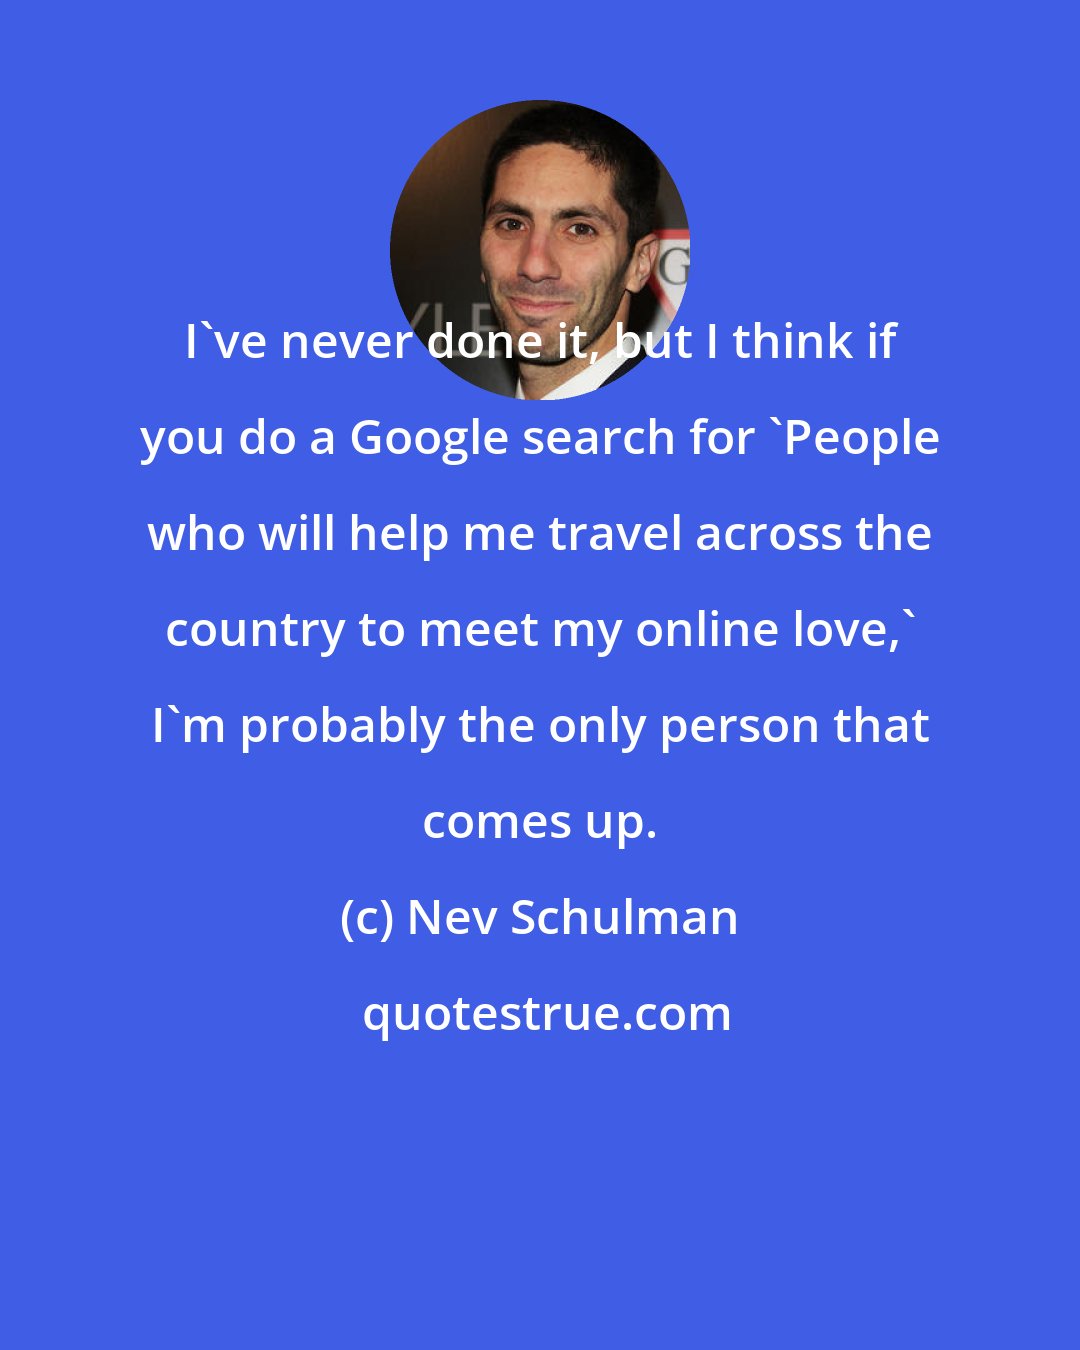 Nev Schulman: I've never done it, but I think if you do a Google search for 'People who will help me travel across the country to meet my online love,' I'm probably the only person that comes up.